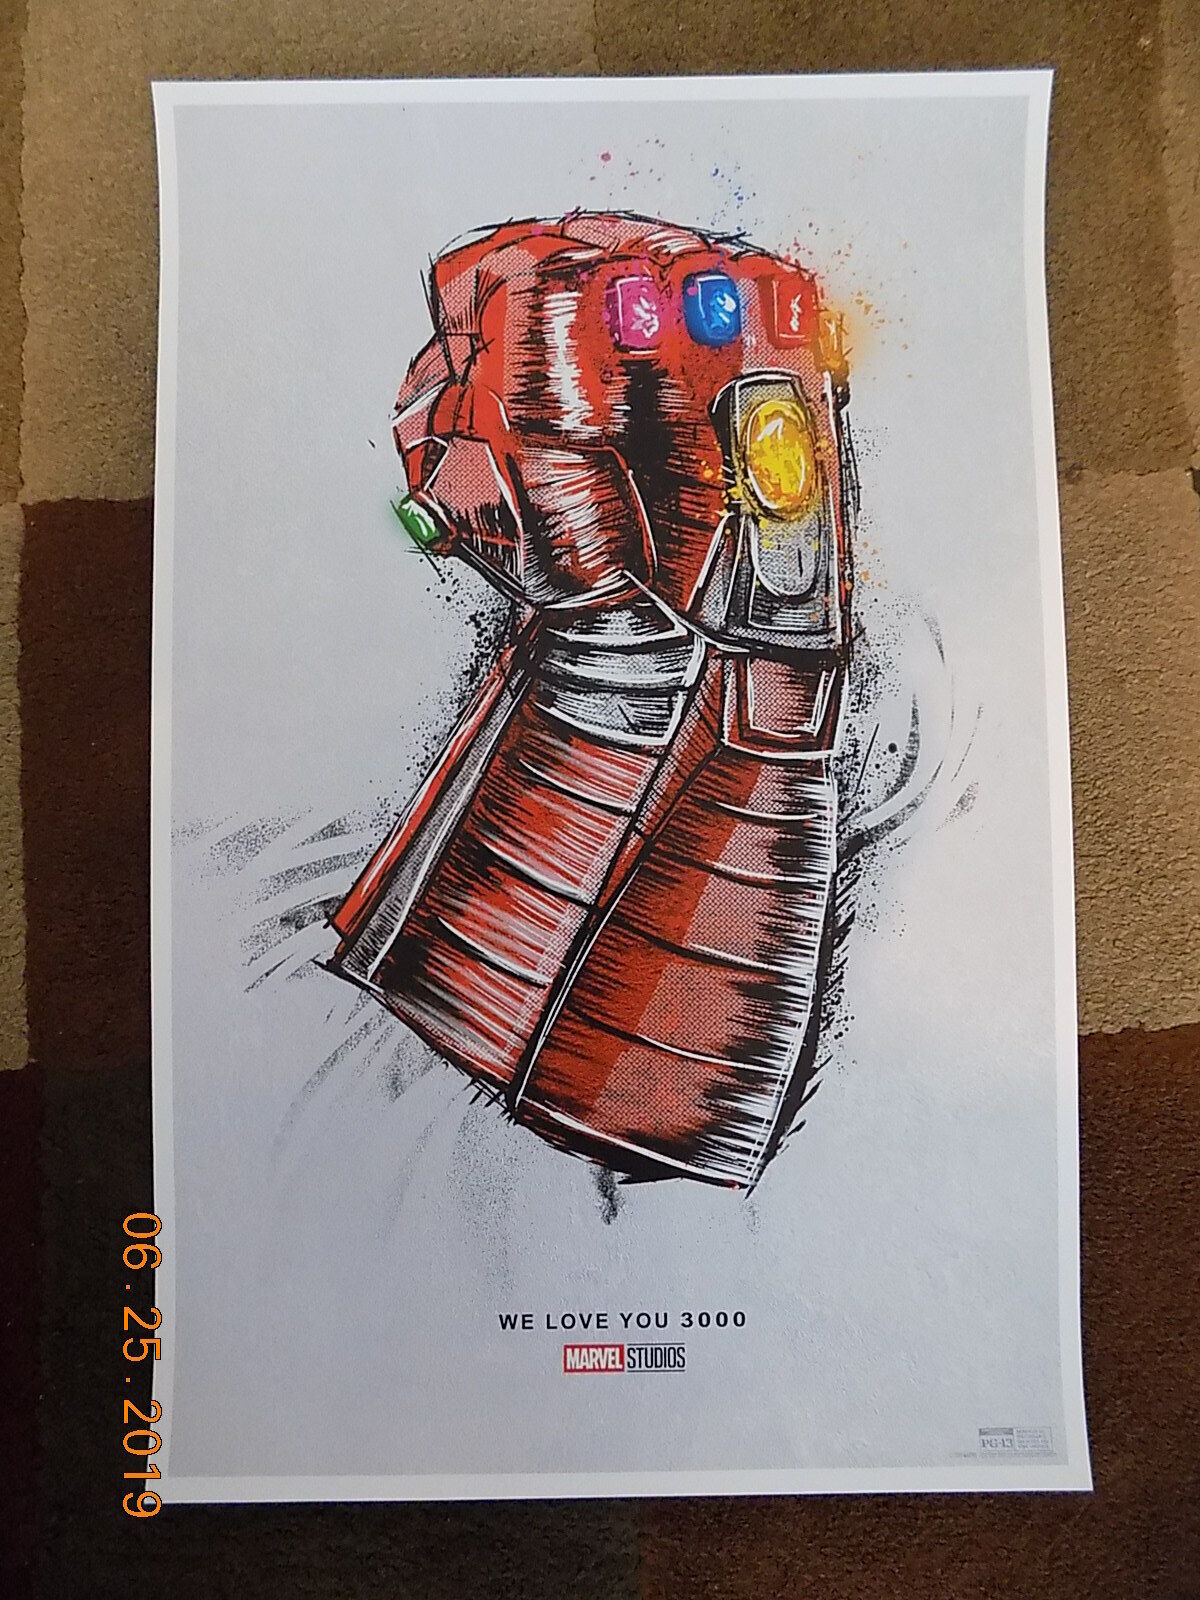 Avengers: End Game ( 11" x 17" ) Movie Collector's Re-Release Poster Print  Без бренда - фотография #2